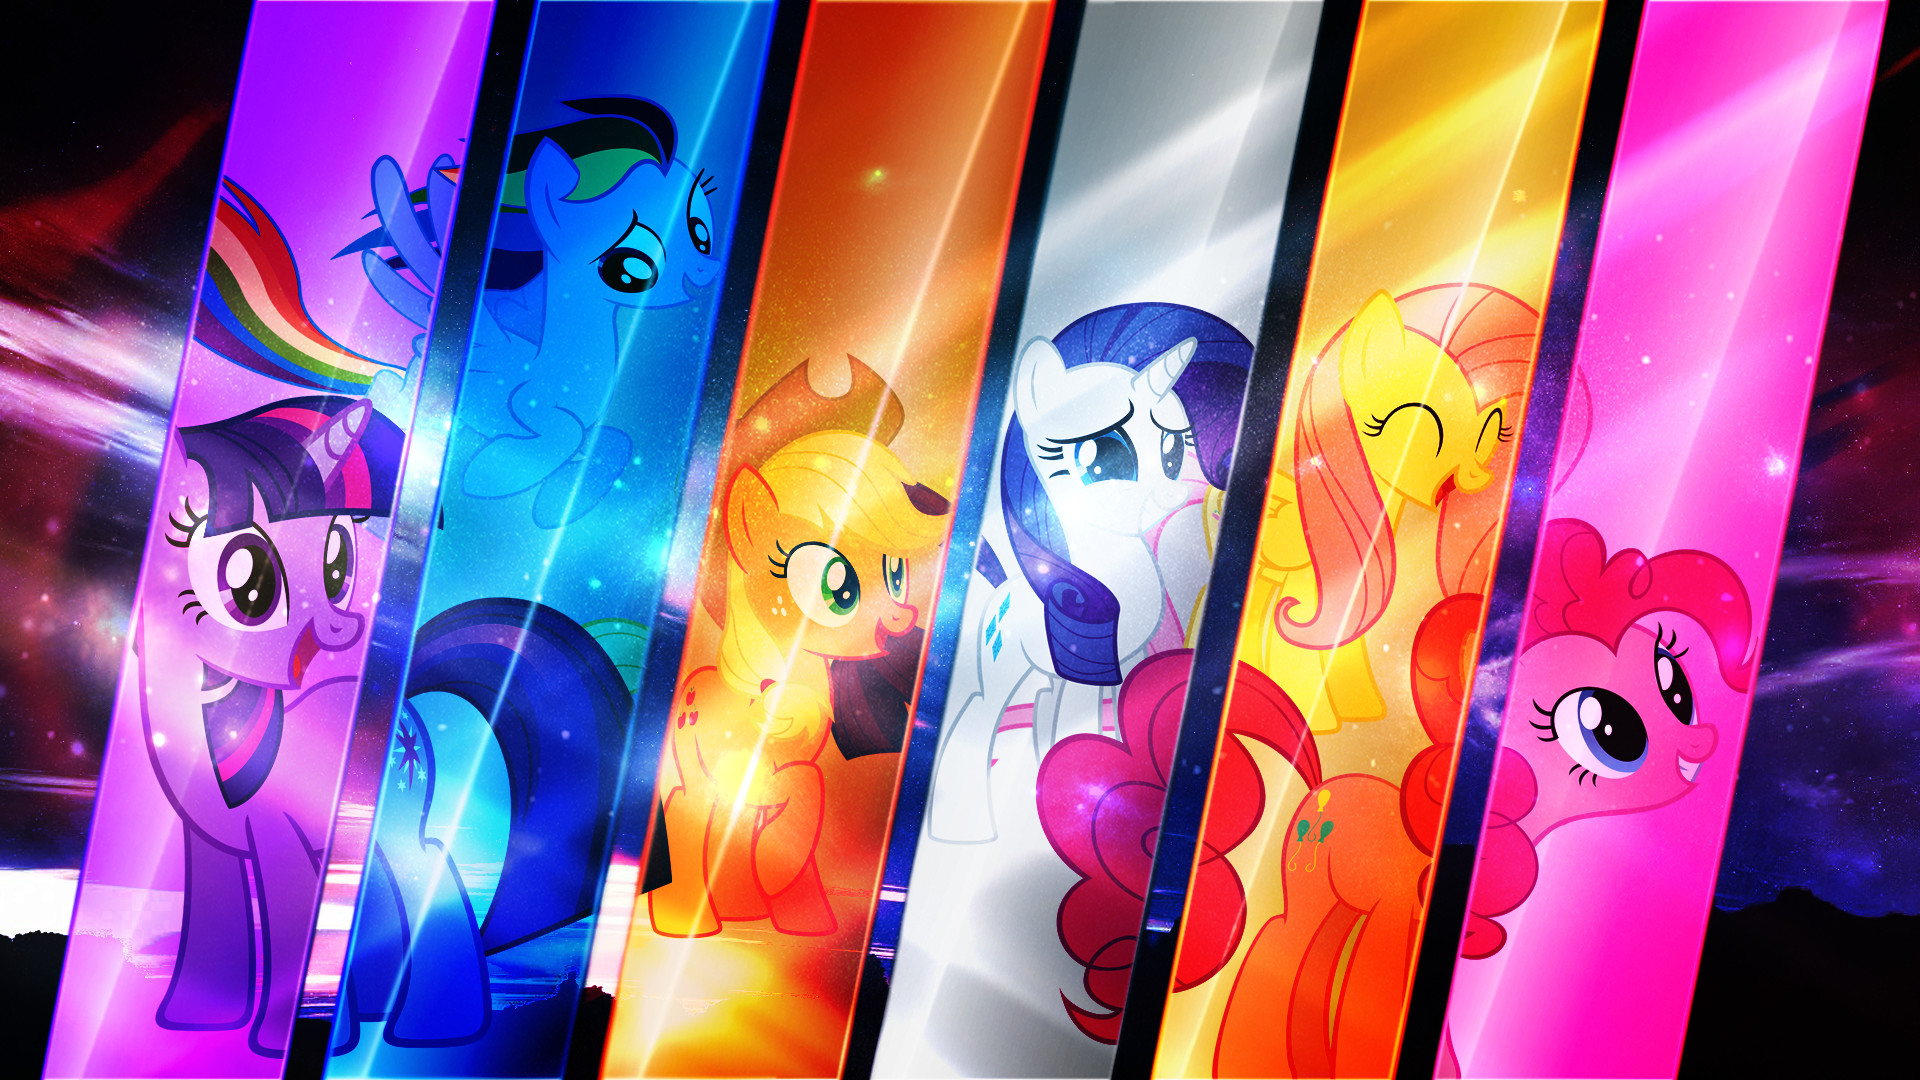 1920x1080 Wallpapers | Brony.com | T-Shirts and Apparel for Bronies and fans of My  Little Pony